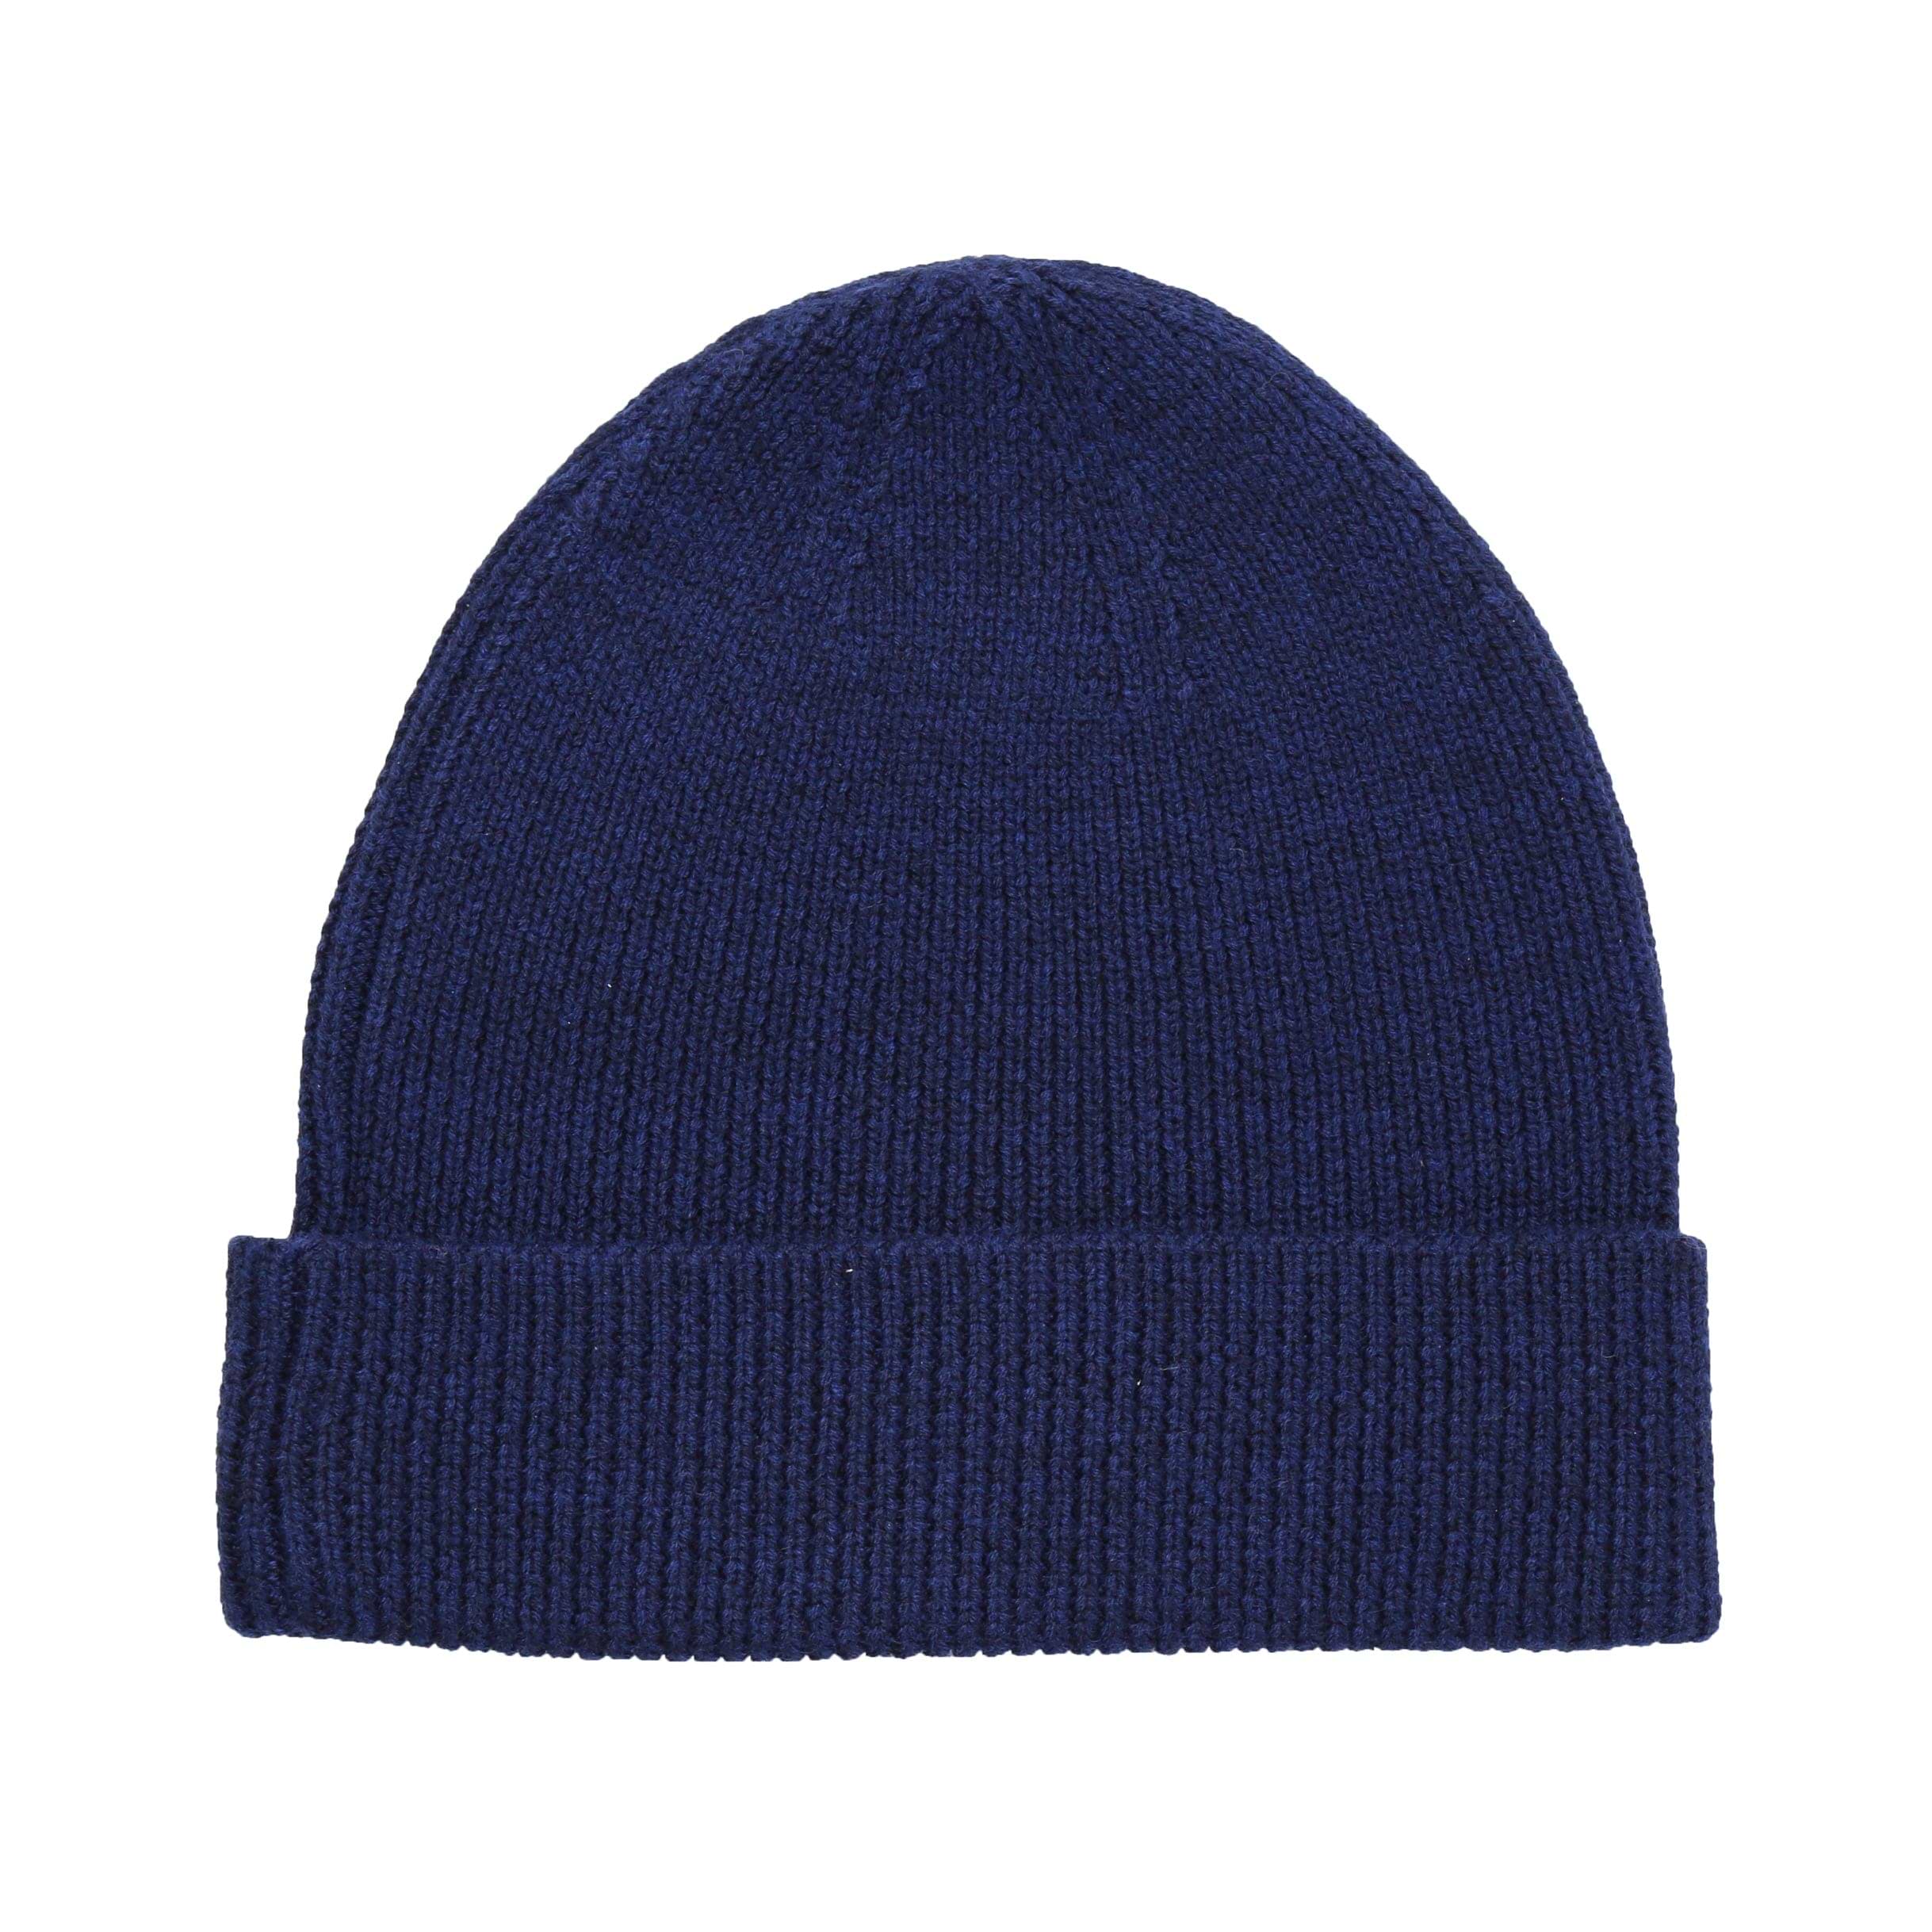 Merino Wool Winter Hat (Additional Colors Available)